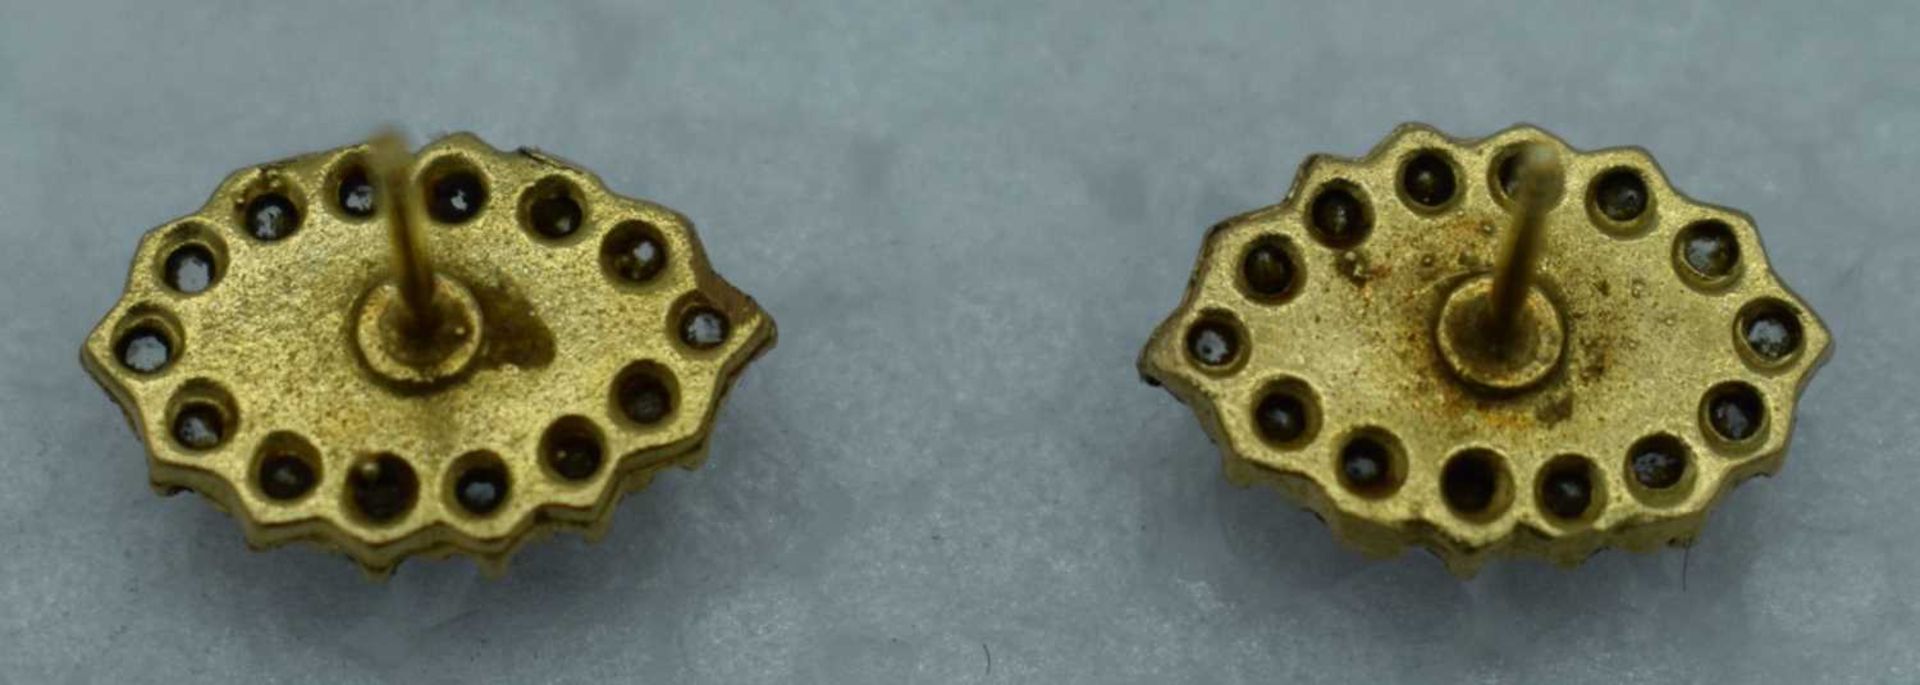 A PAIR OF 18CT GOLD EARRINGS. 3.6 grams. 1.5 cm x 1 cm. - Image 2 of 3